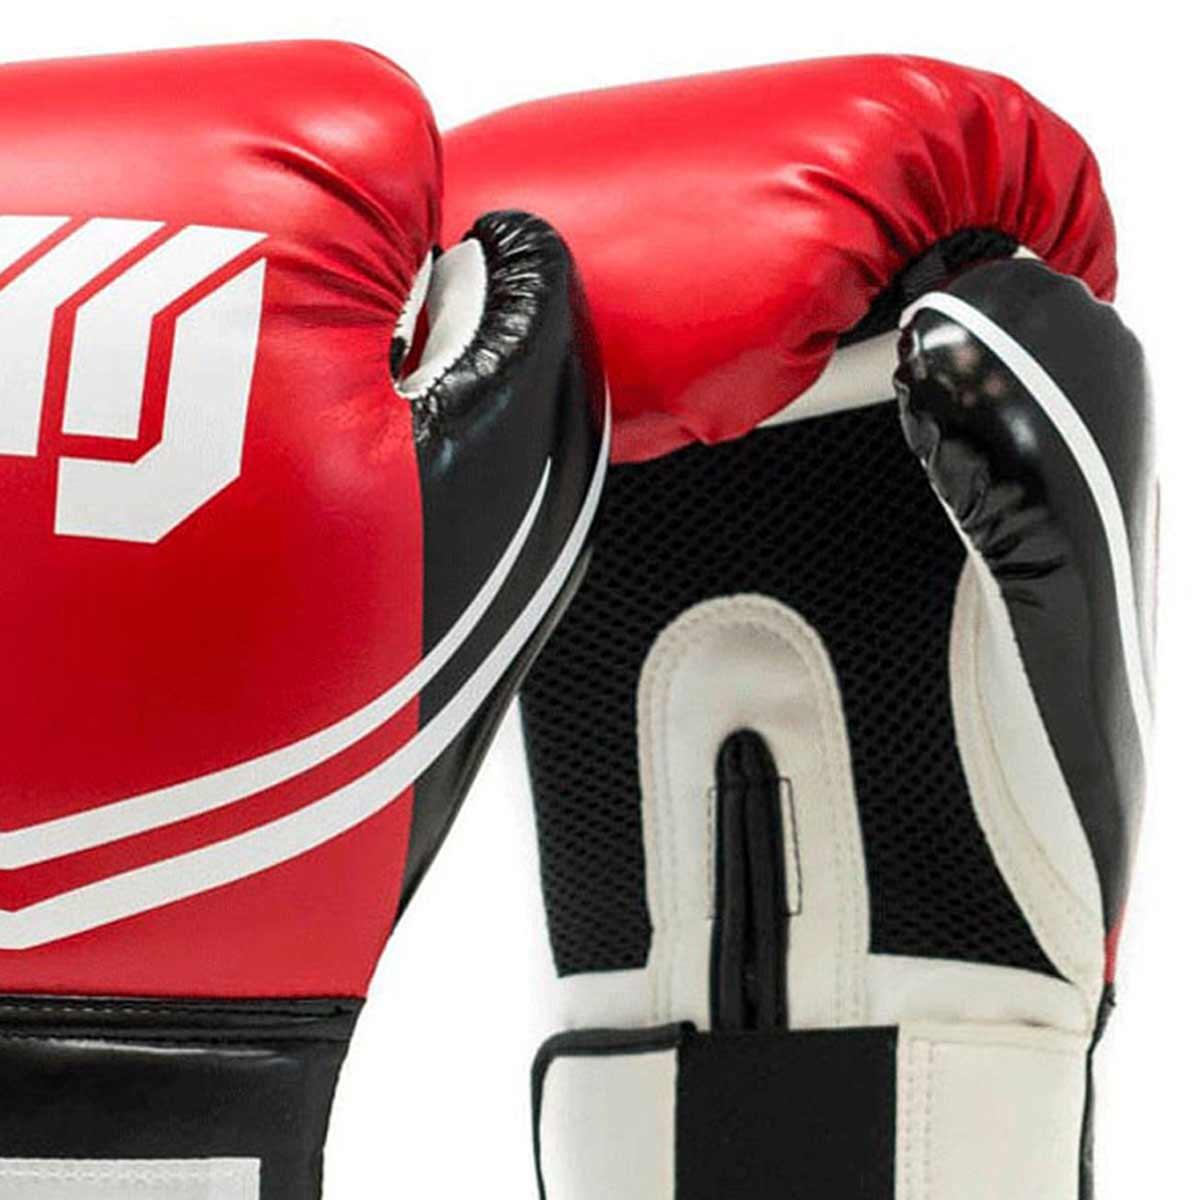 VULCAN BOXING GLOVES 12oz RED/BLACK WITH HANDWRAPS 3/7